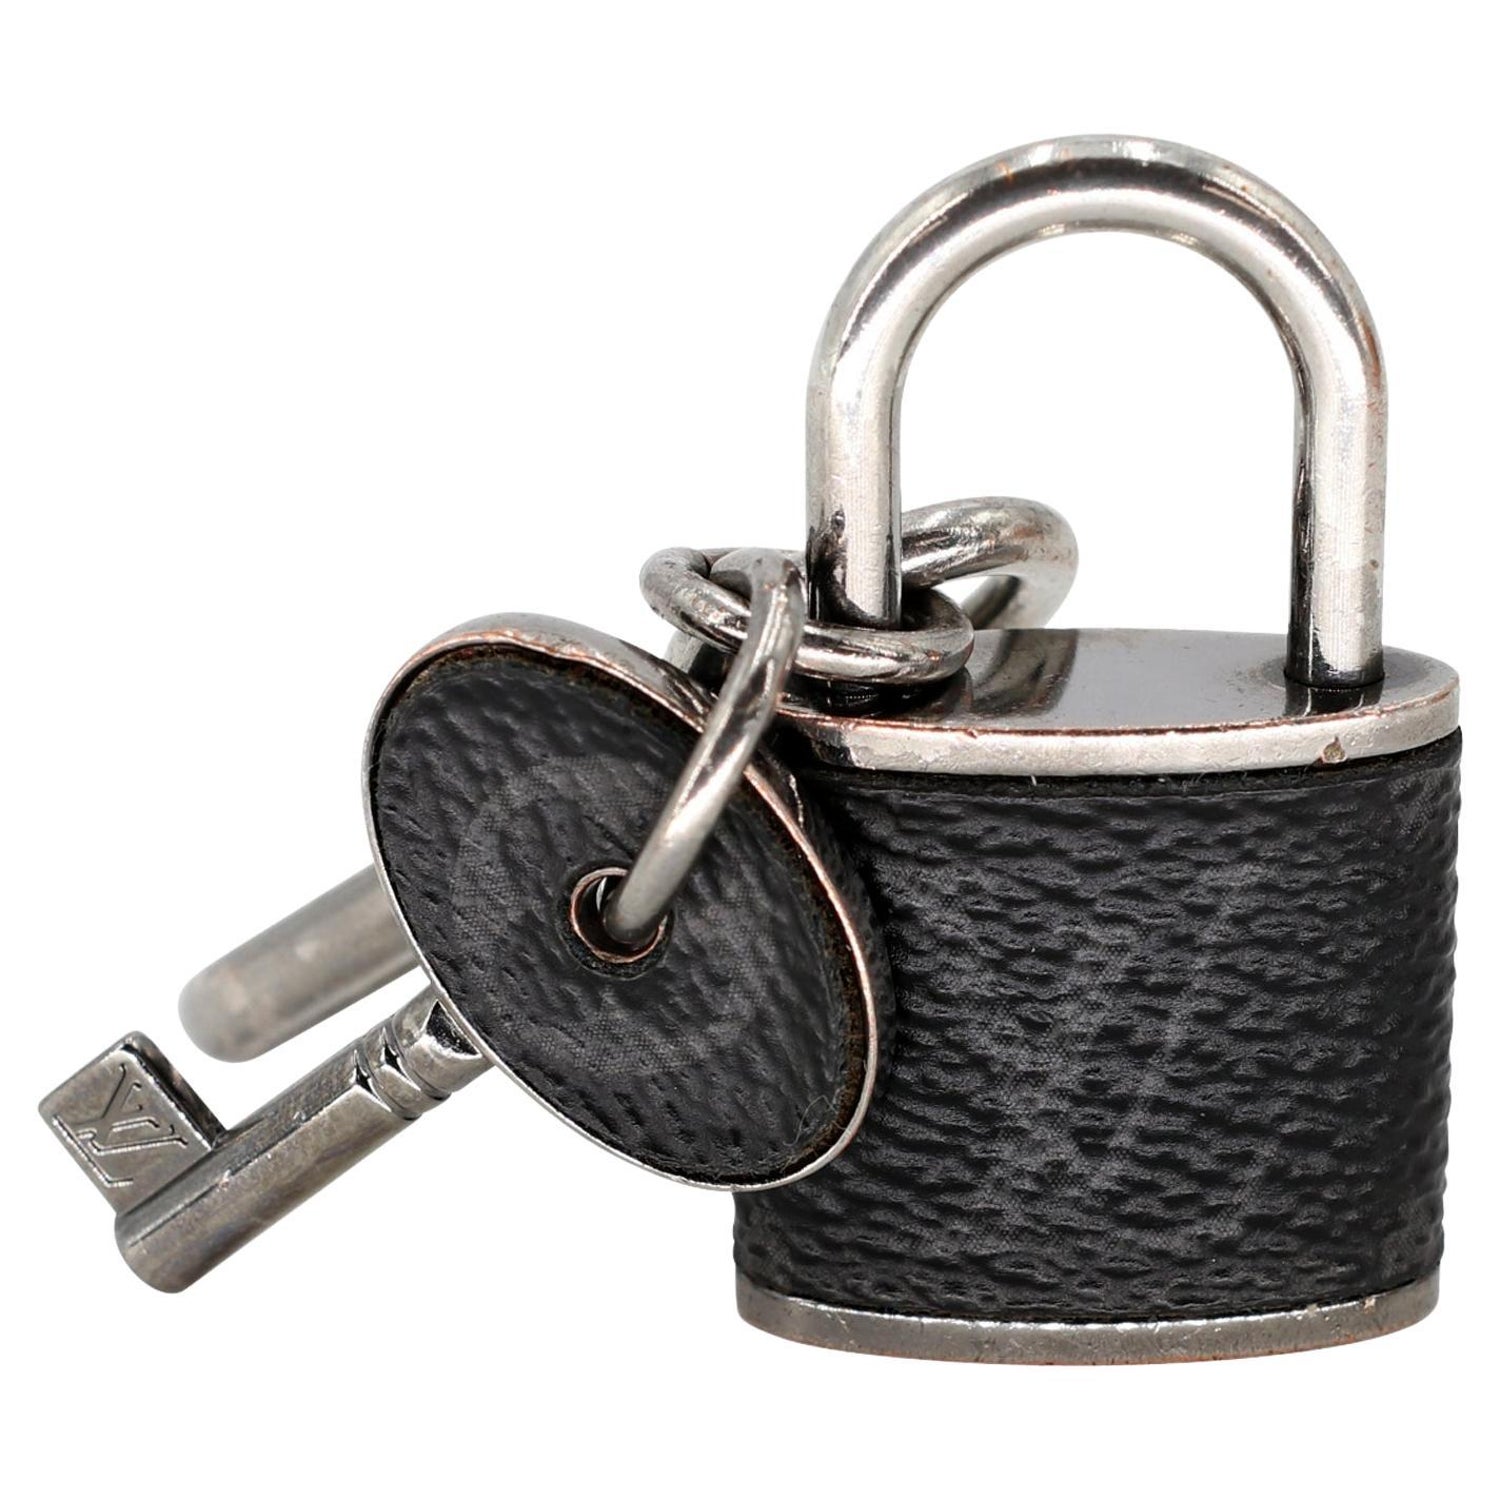 Louis Vuitton Padlock Necklace - 4 For Sale on 1stDibs